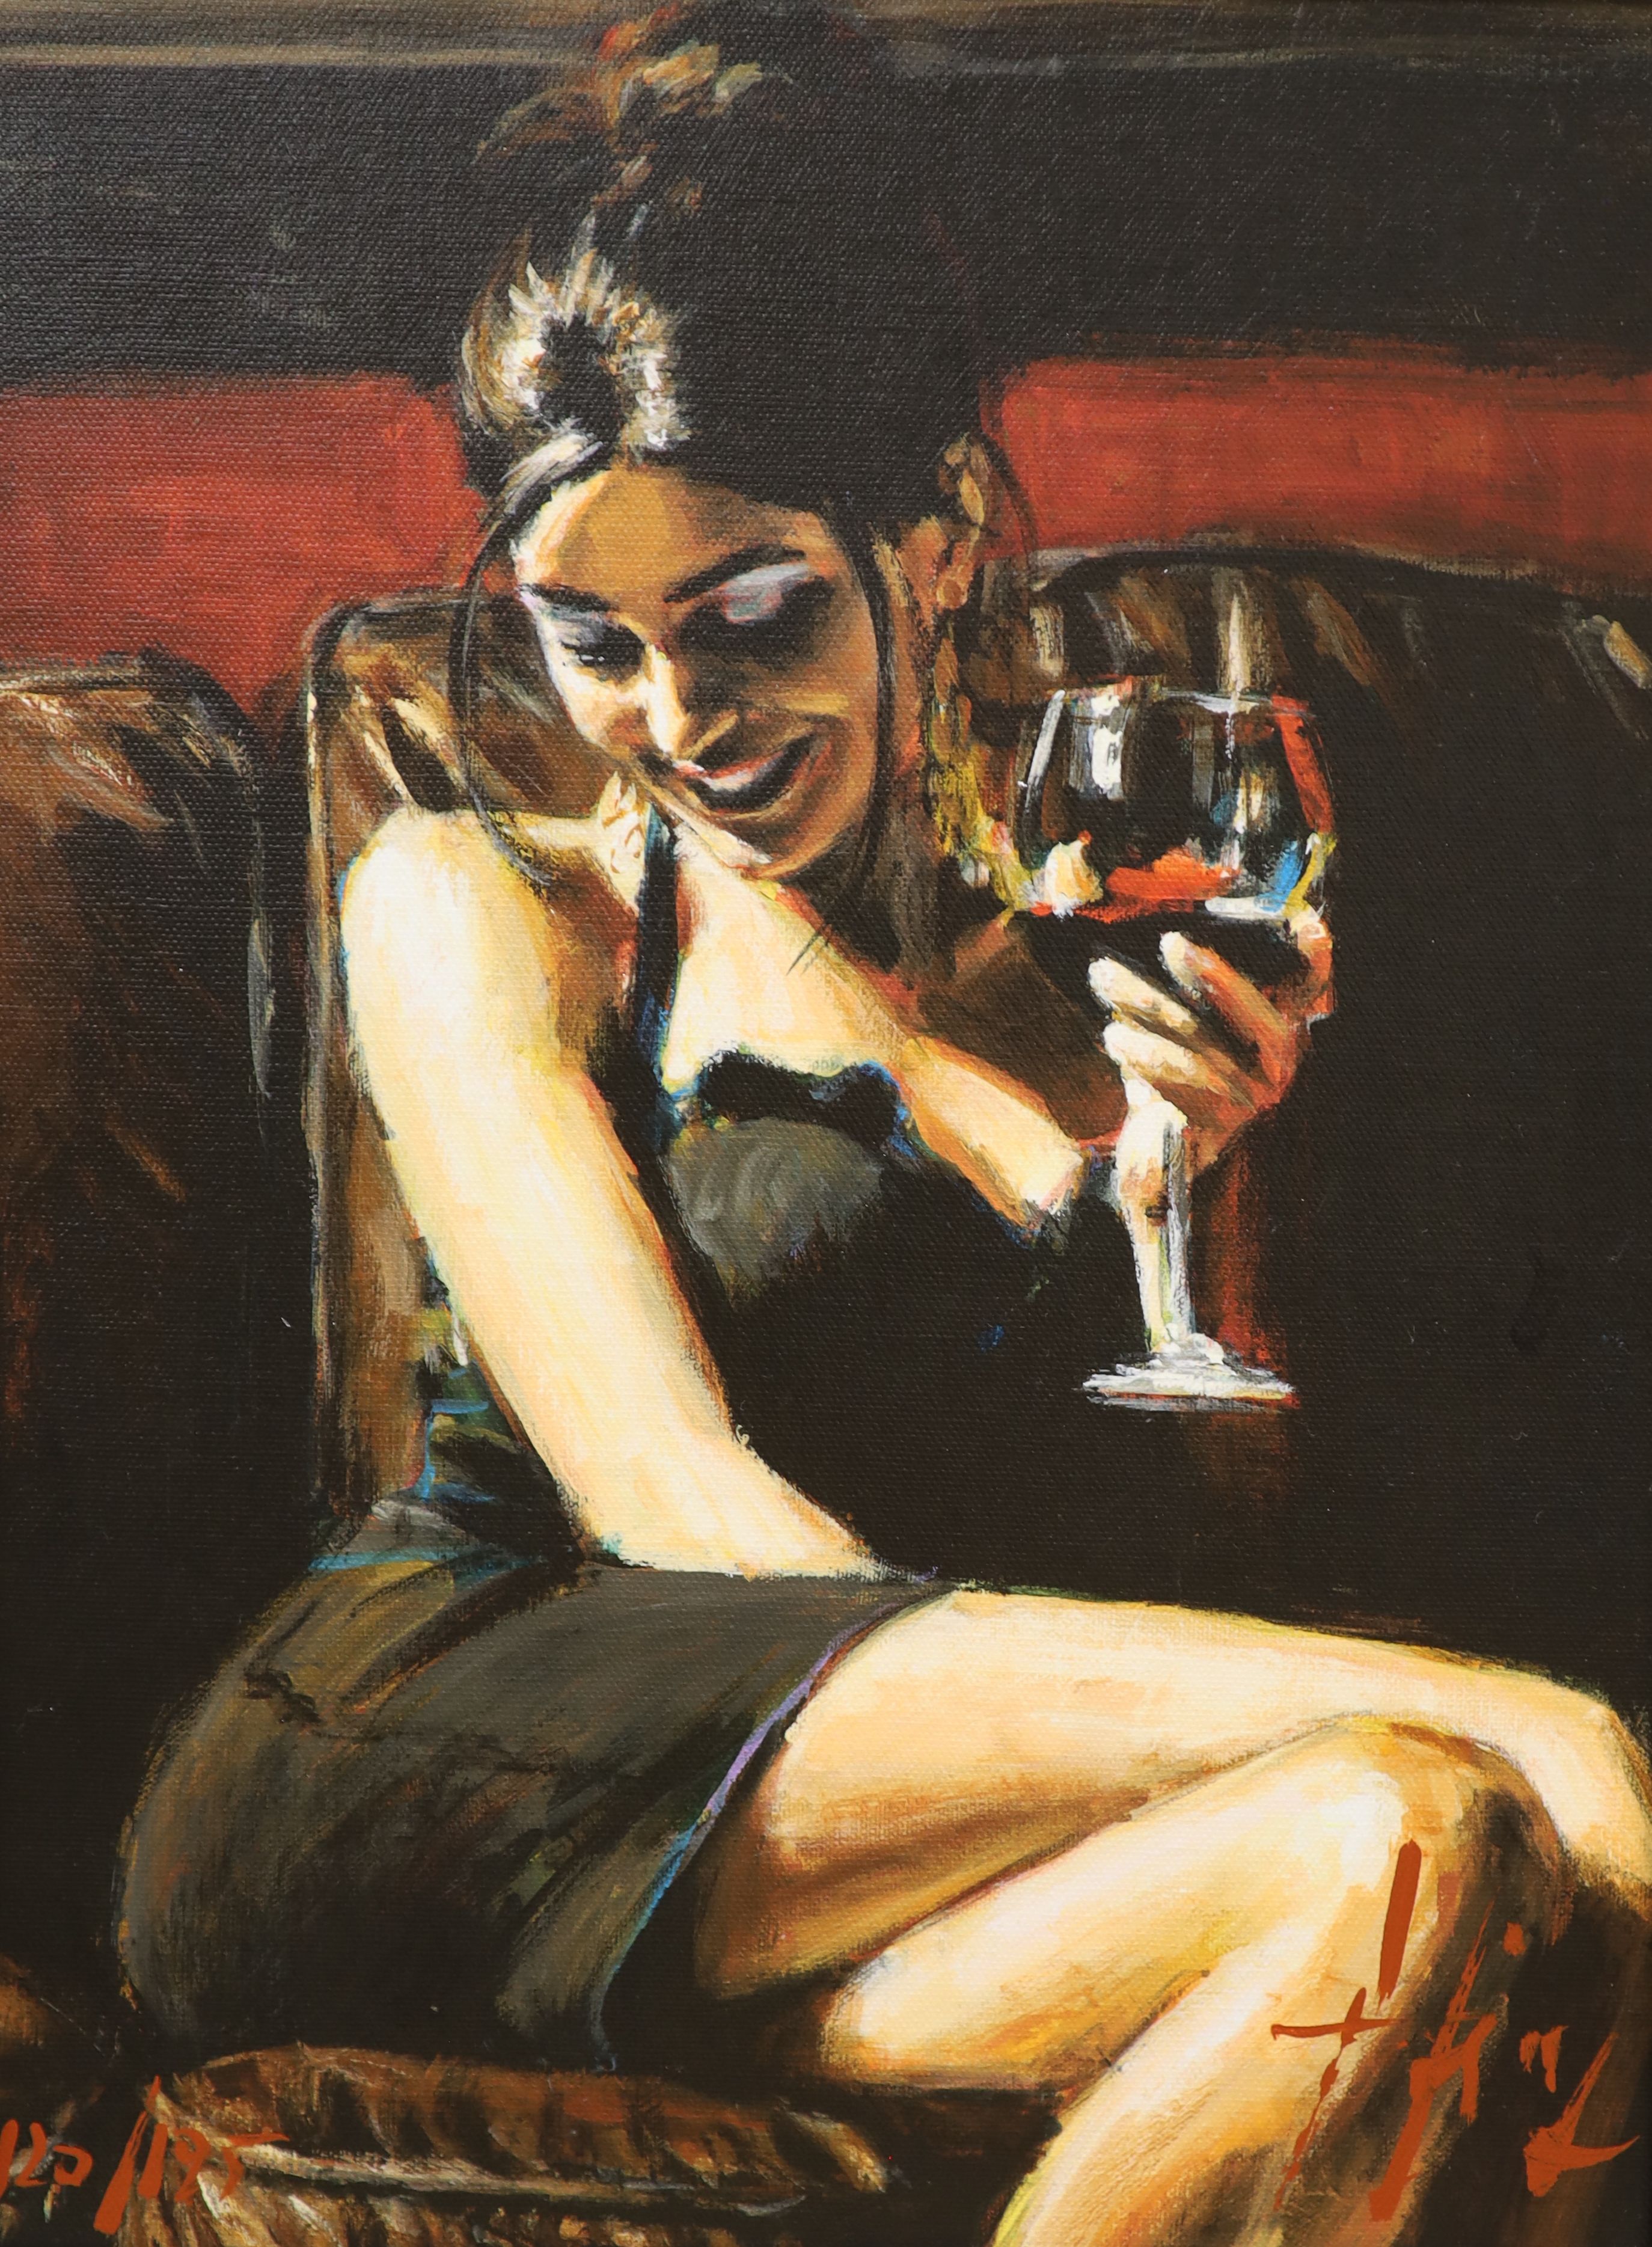 Fabian Perez, two hand embellished glicee canvases, Blue and Red III, 17/195 and Tess VII, 120/195, both with COA, 40 x 30cm